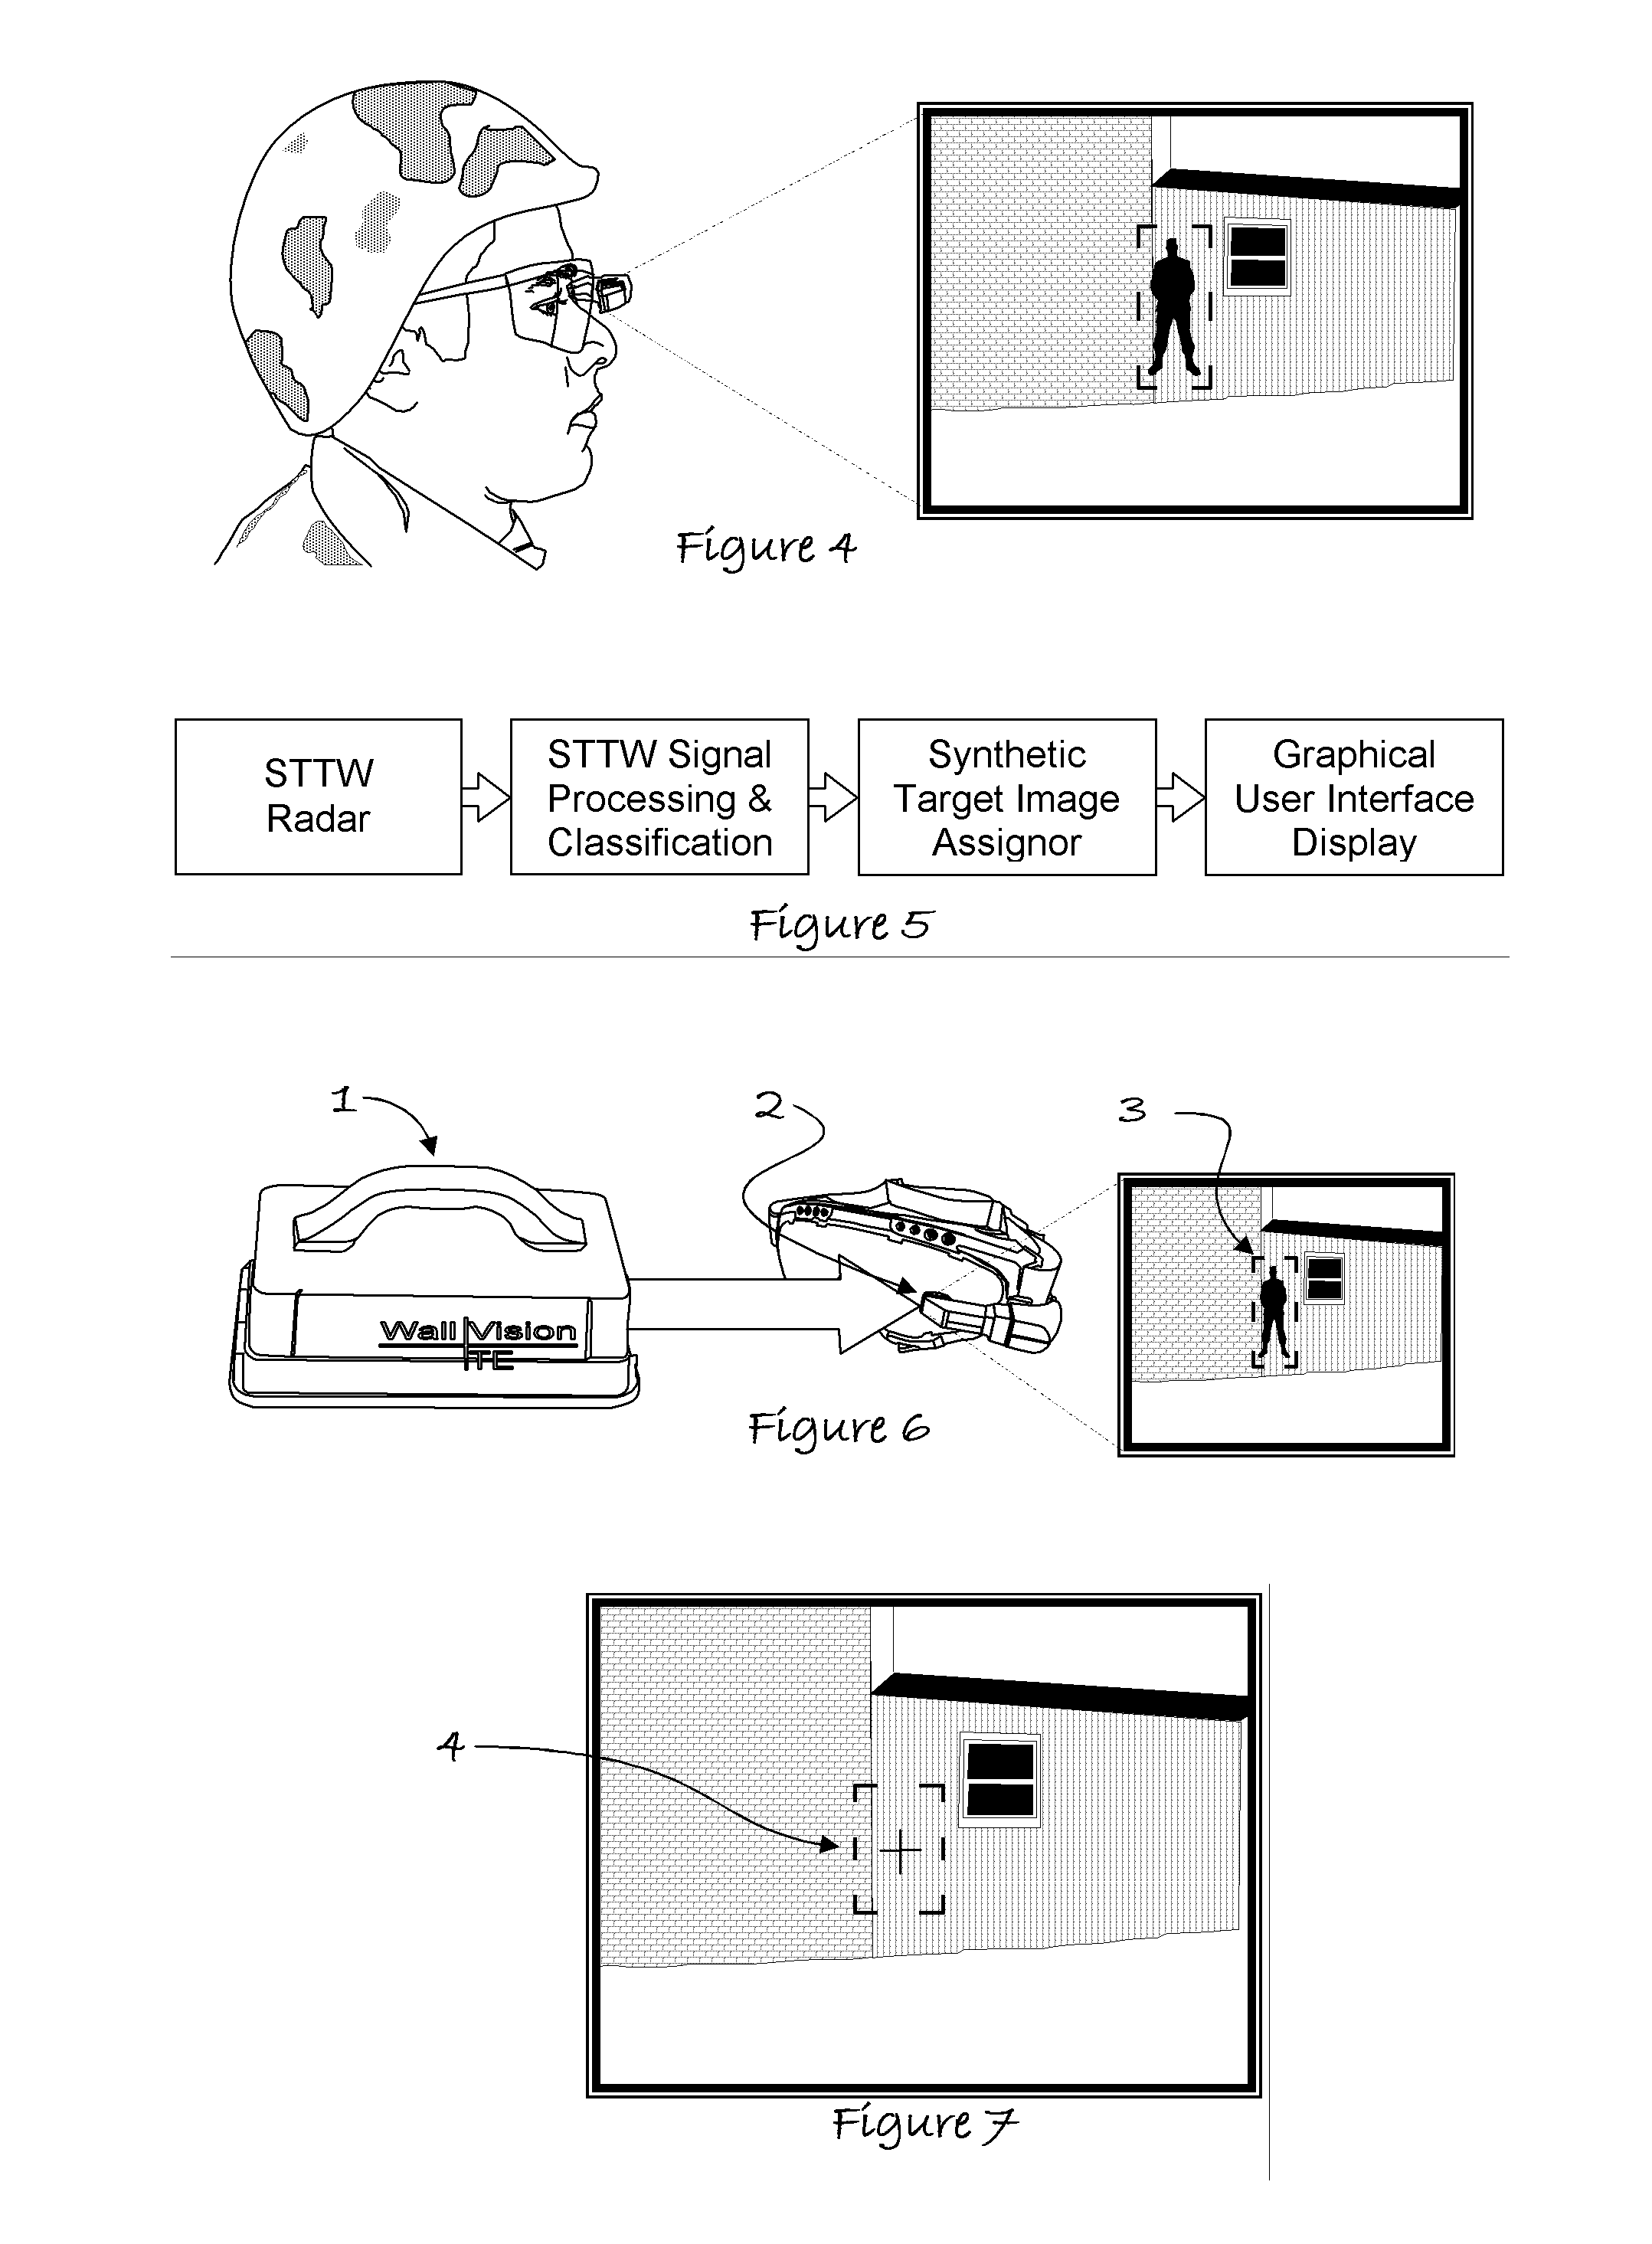 Method to Provide Graphical Representation of Sense Through The Wall (STTW) Targets